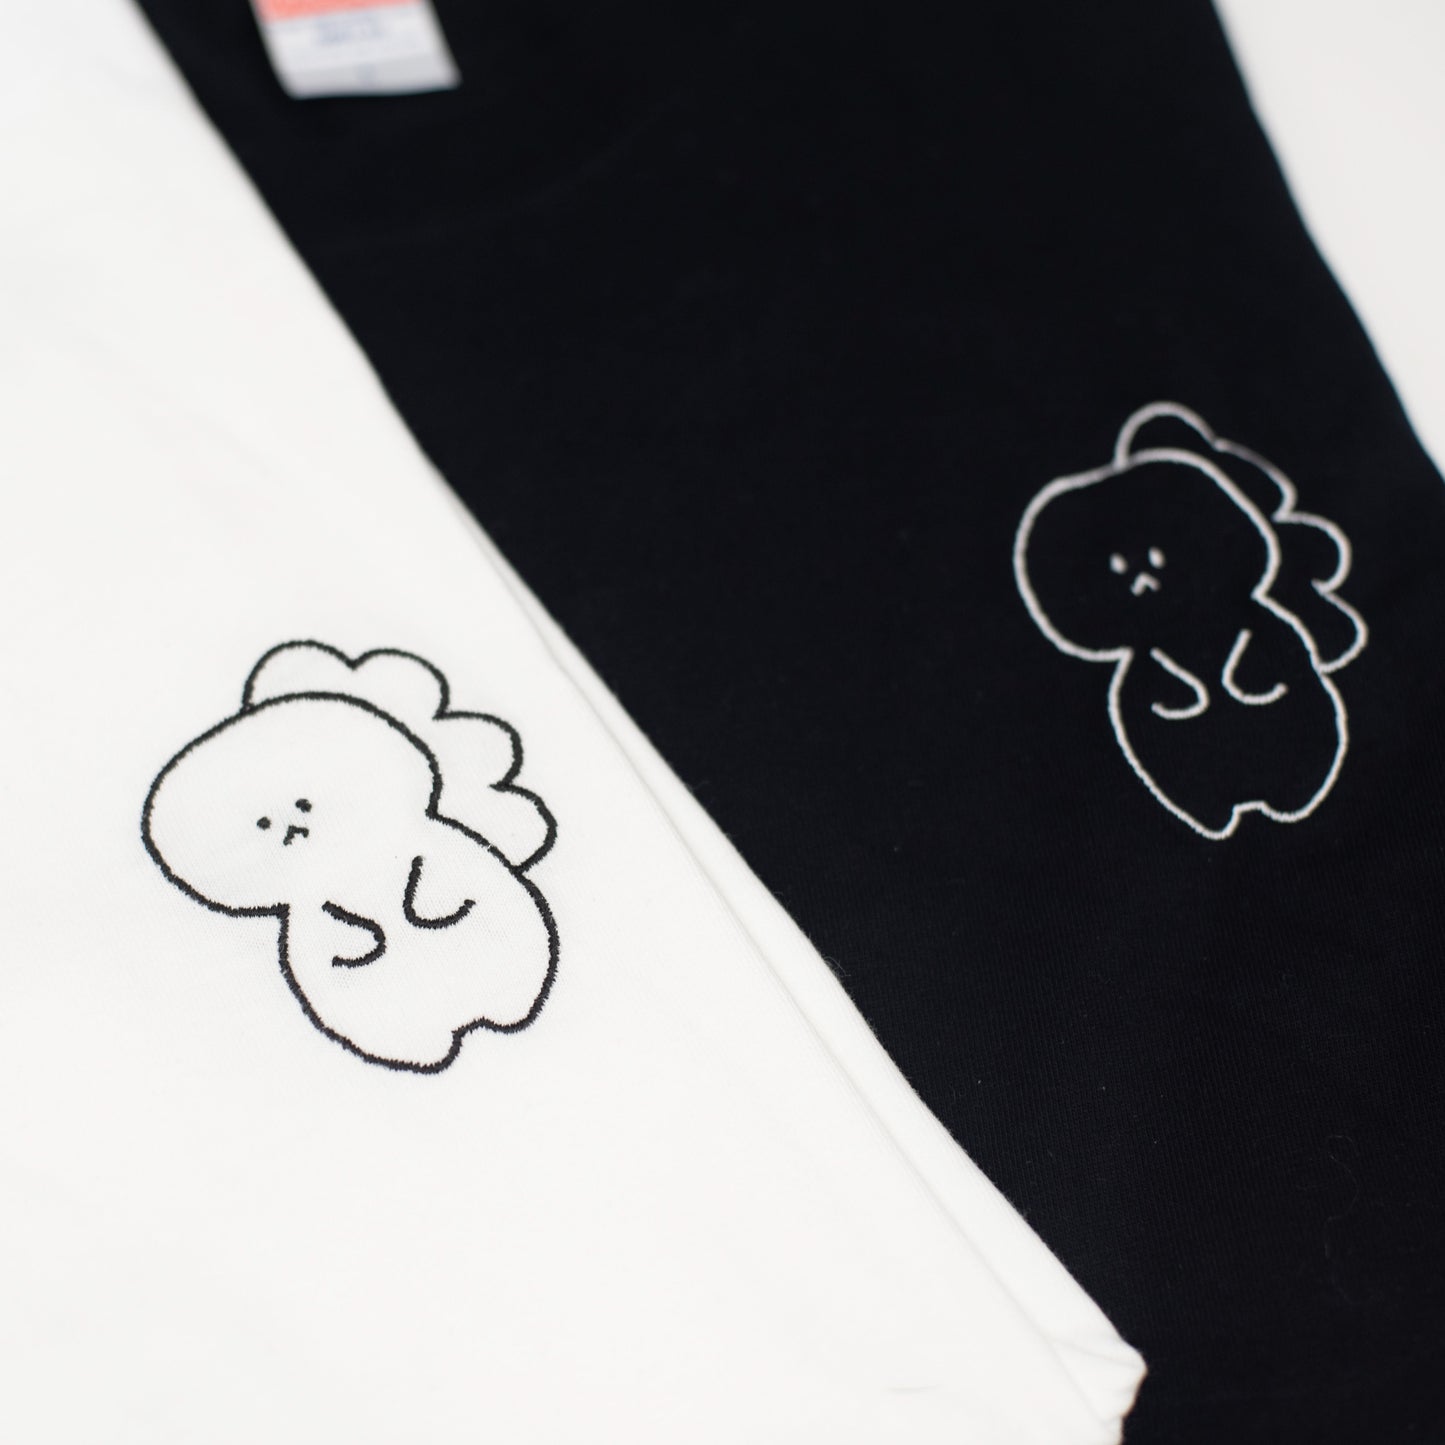 [Troublesome Saurus] Short sleeve embroidered T-shirt